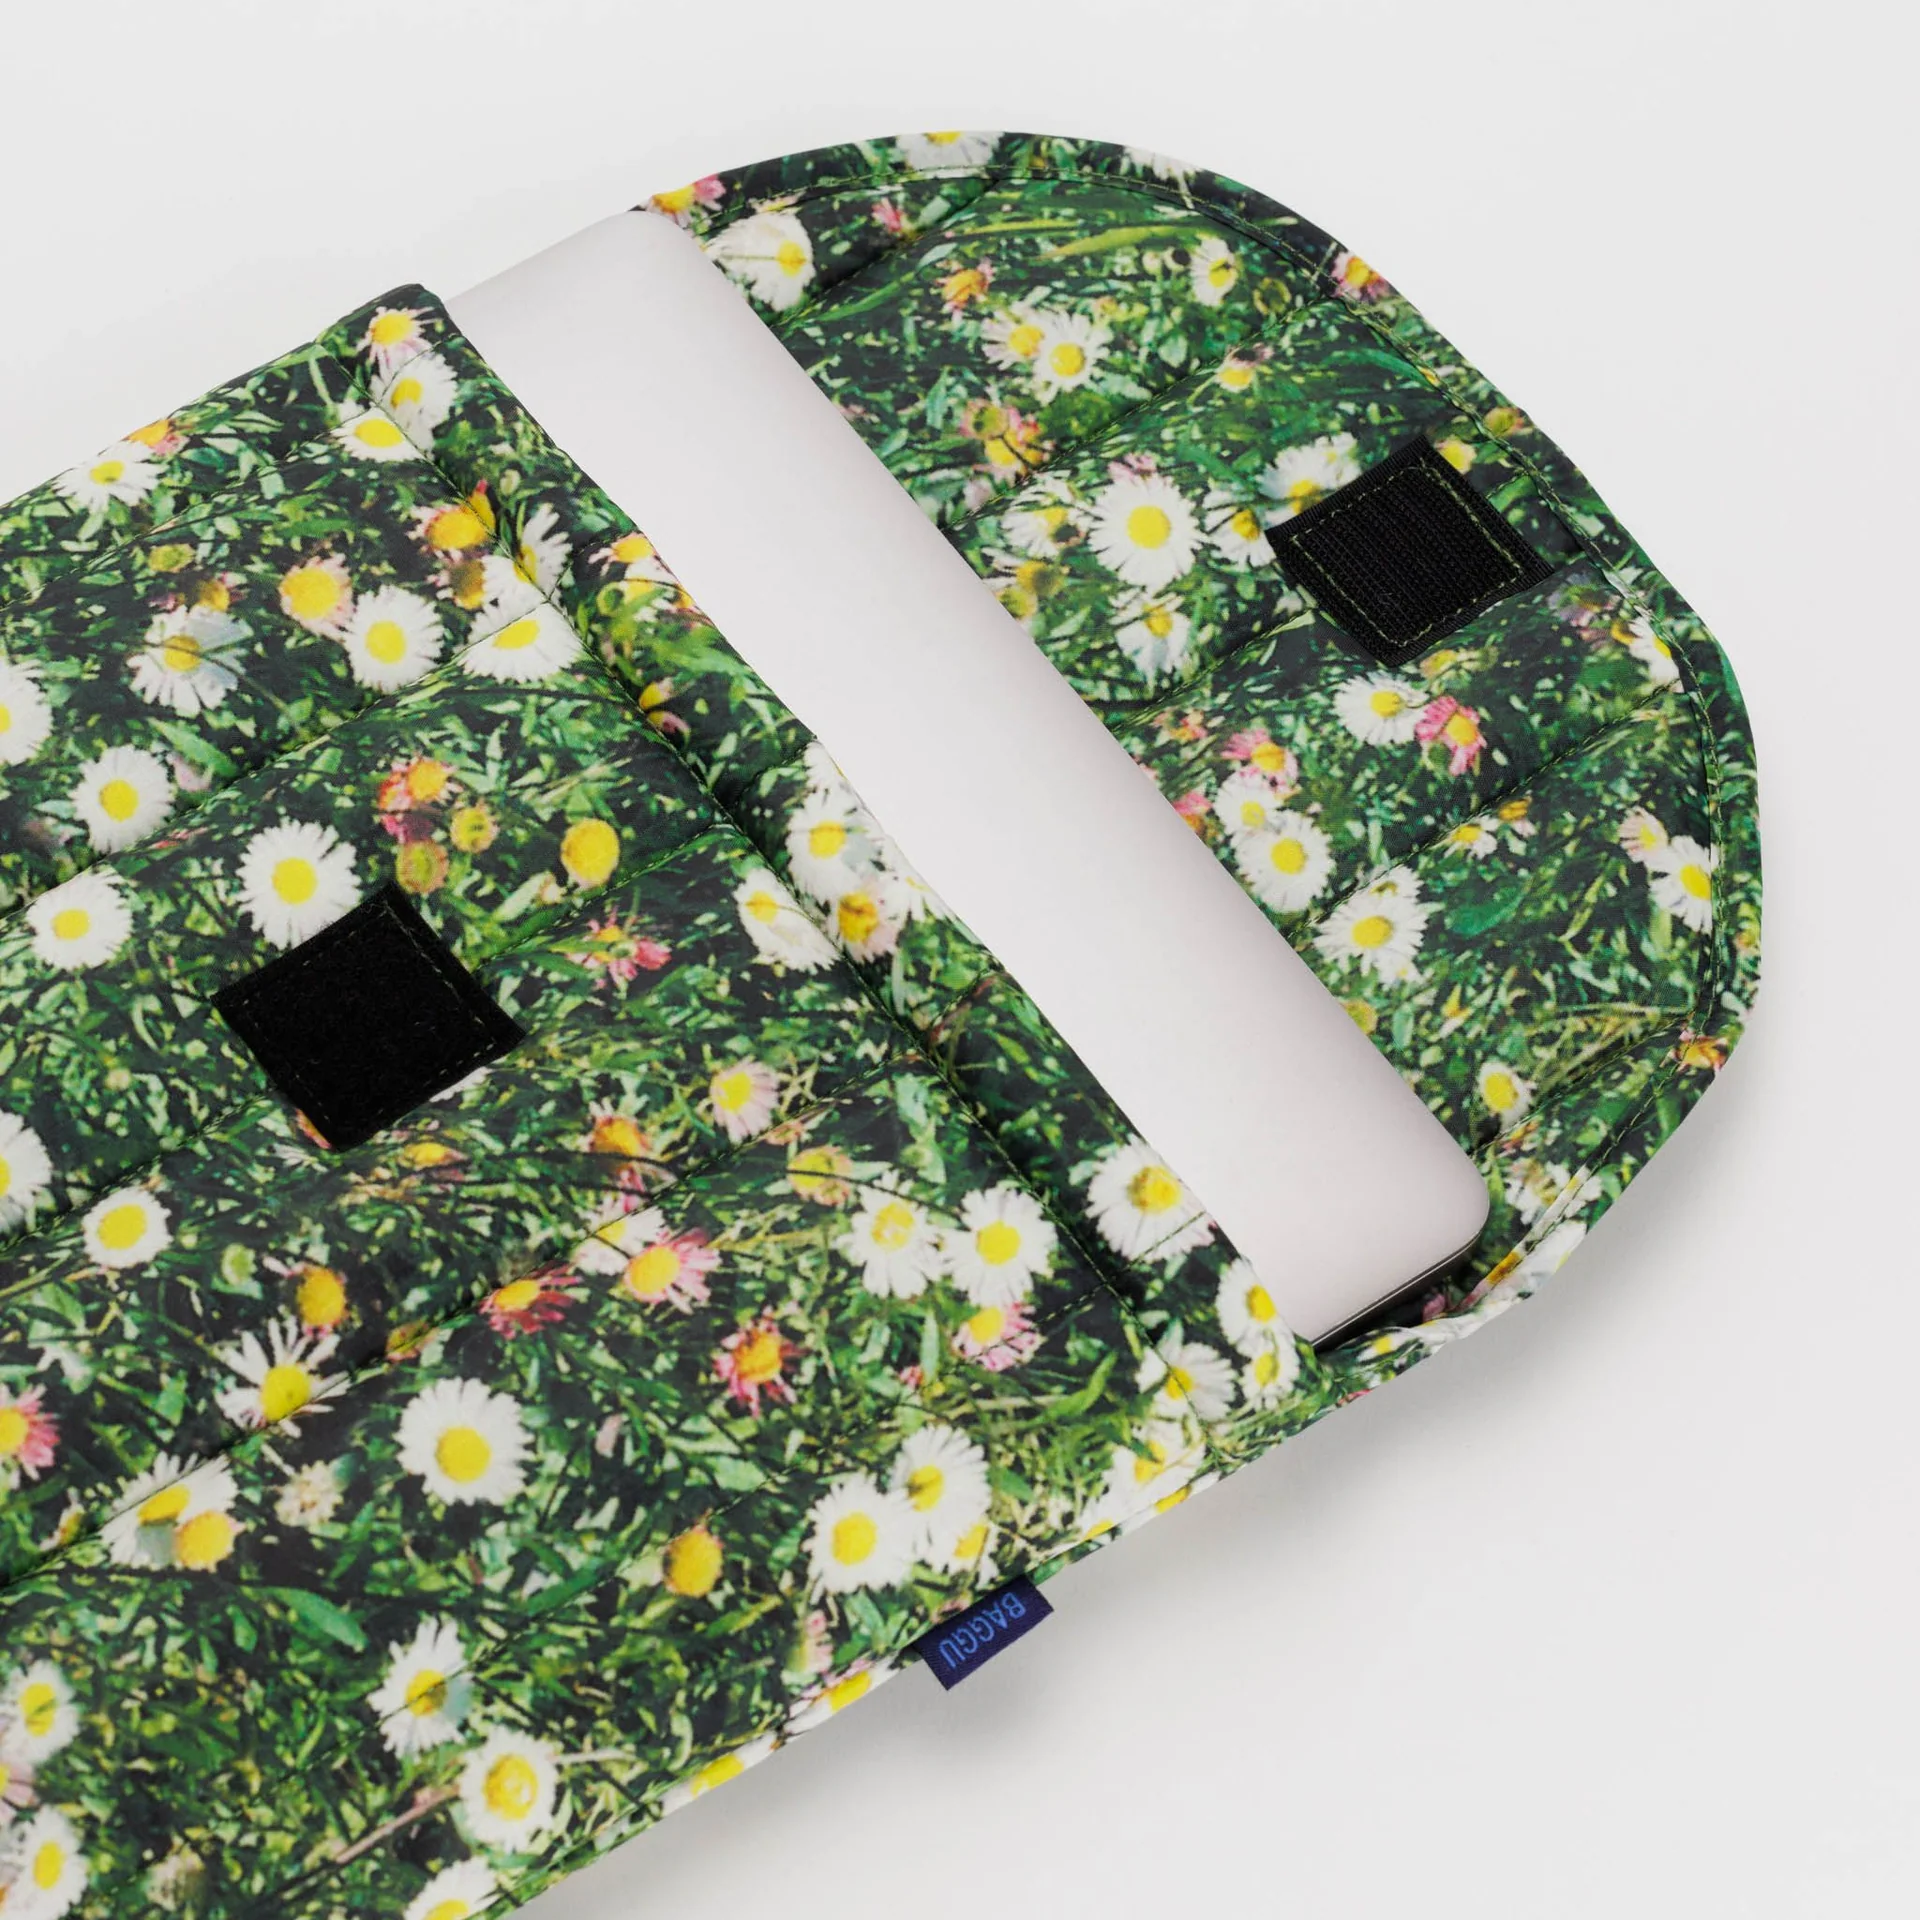 Laptop peeking out of lapto case. Floral/ grass details pop against white background. 